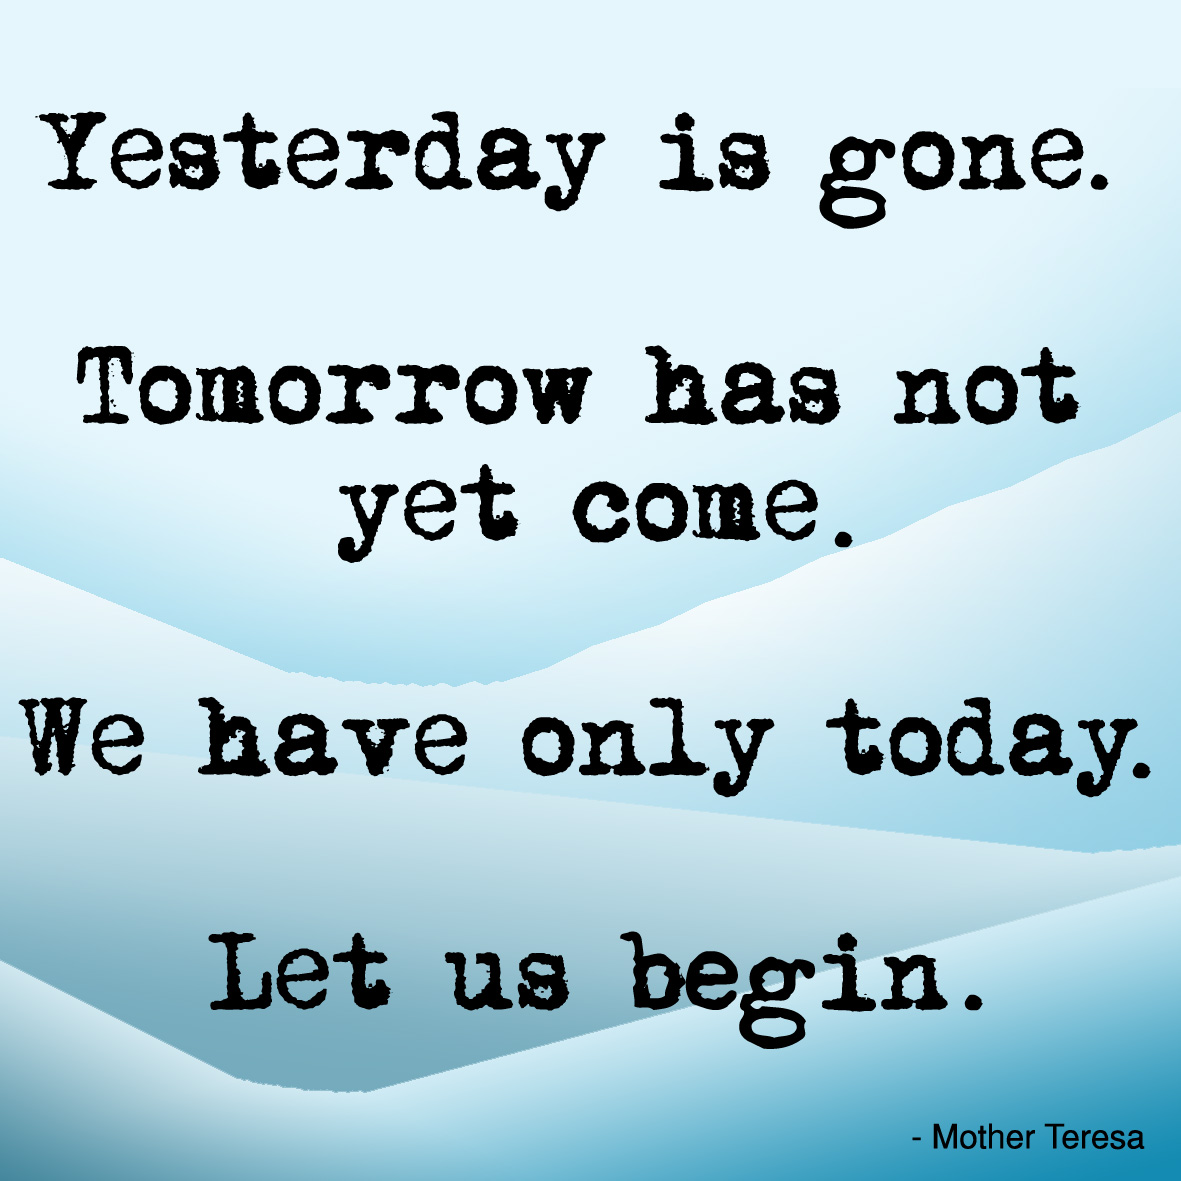 Yesterday is gone tomorrow. Not yet. Let us begin. Are we coming yet. I go there yesterday